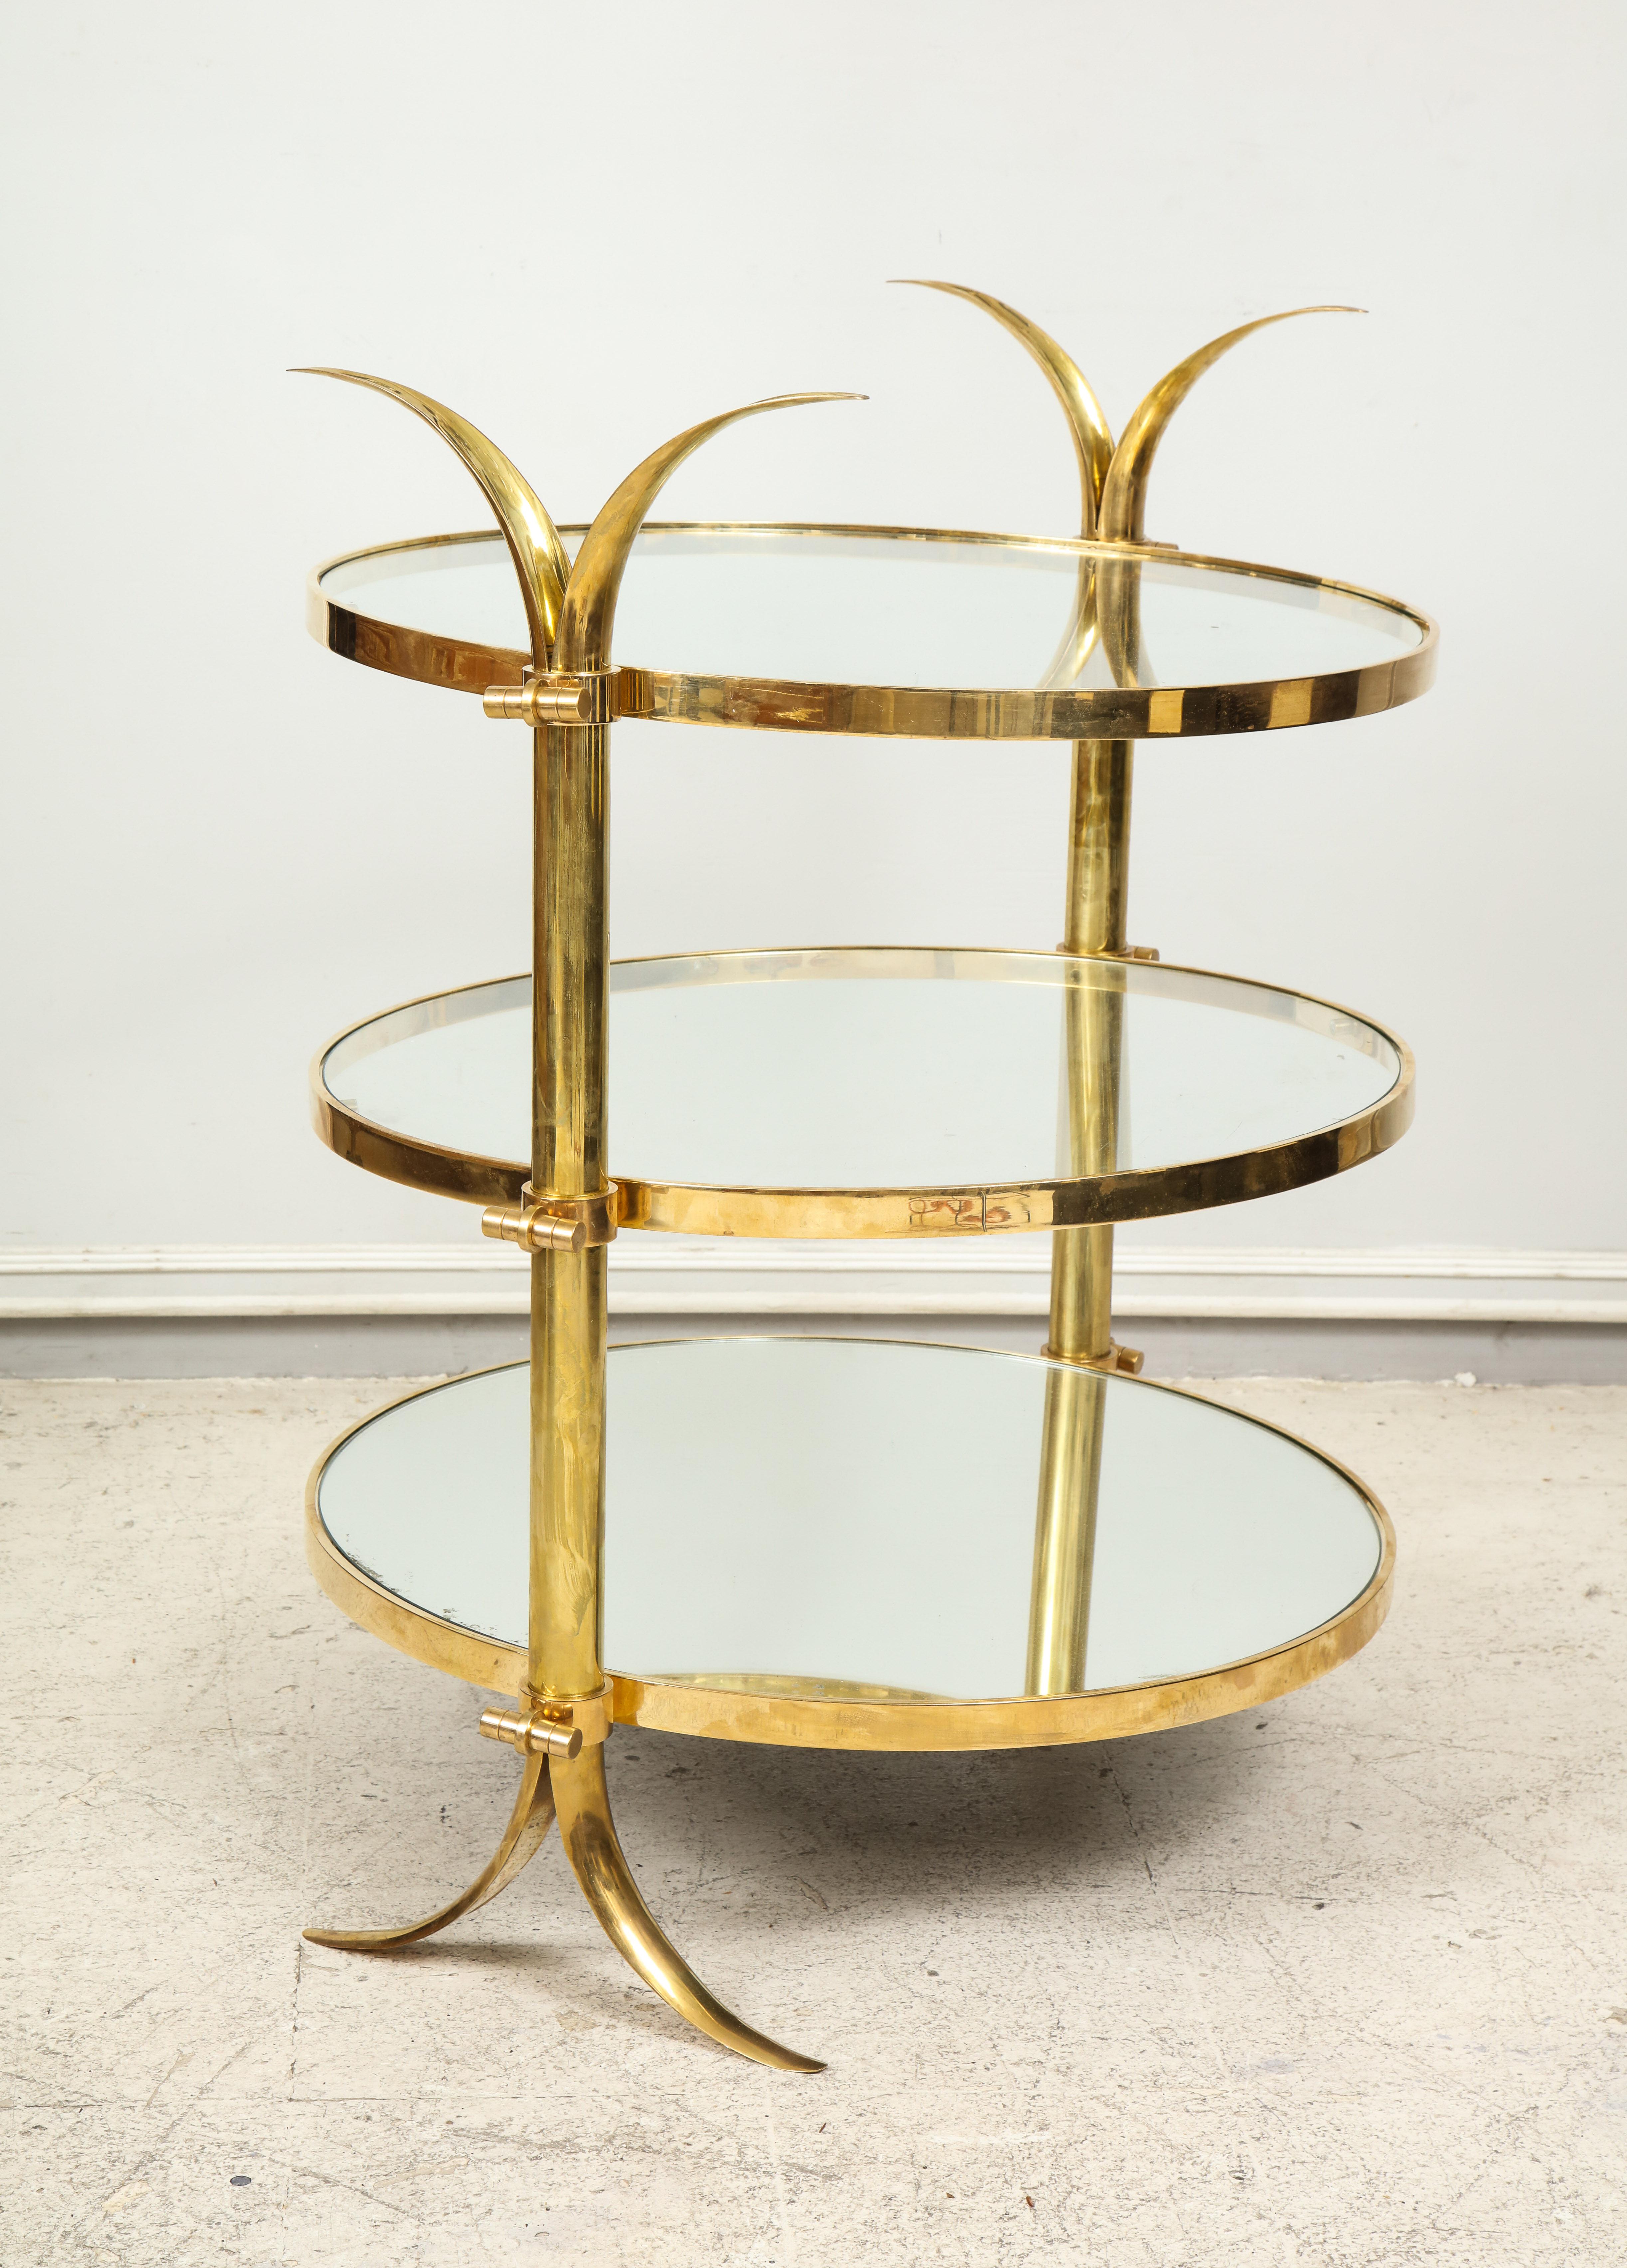 Bespoke three-tiered brass tulip table by Amir Khamneipur.
This table is customizable with a lead time of 8-10 weeks.